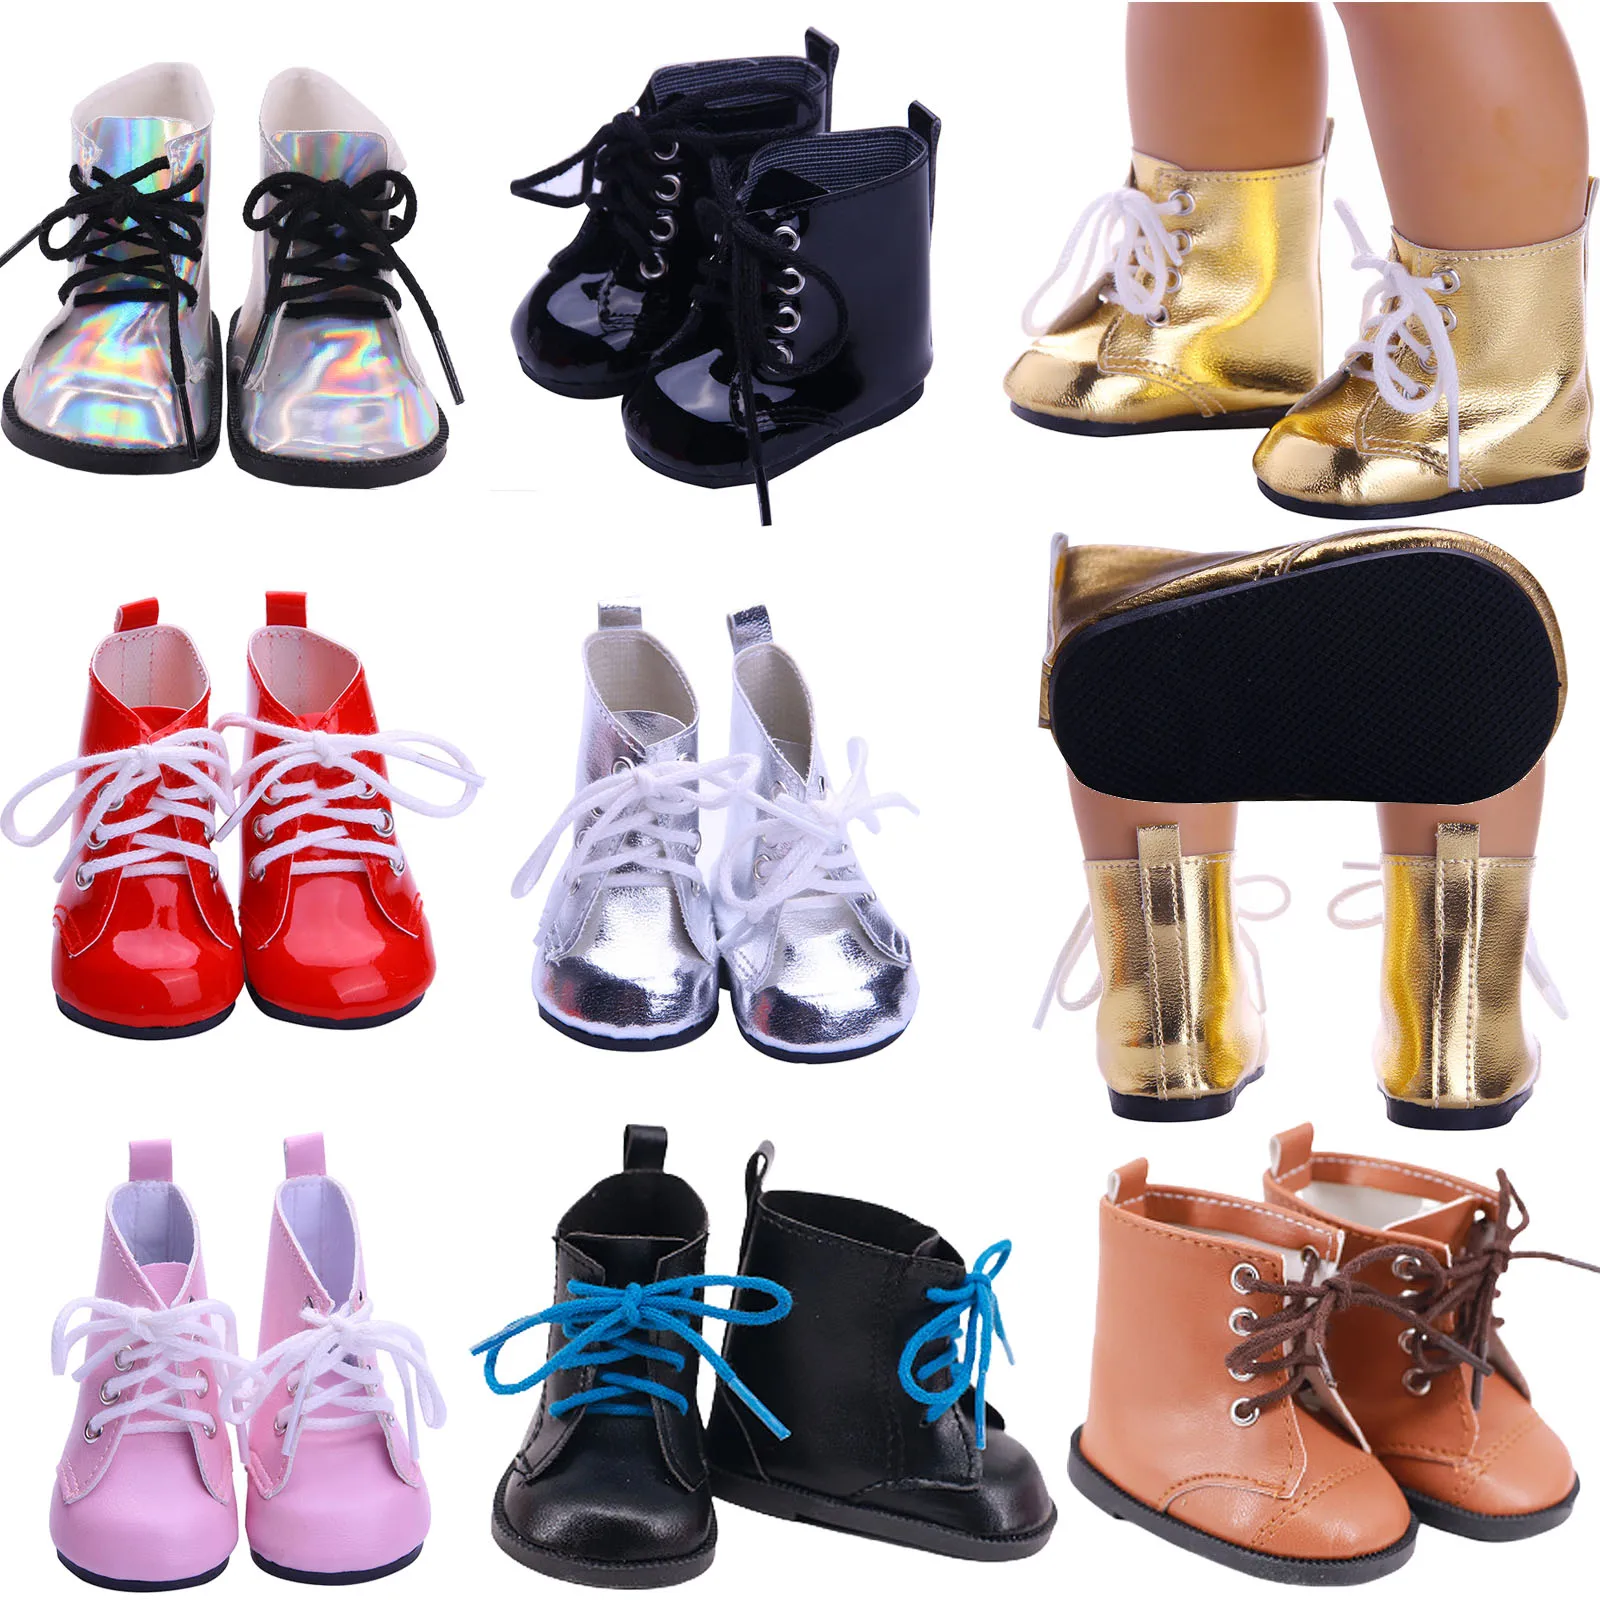 7Cm Doll Shoes Lace-Up Leather High Glossy Boots And Socks For 43Cm Reborn Baby&18 Inch American Doll Girls Our Generation Toys